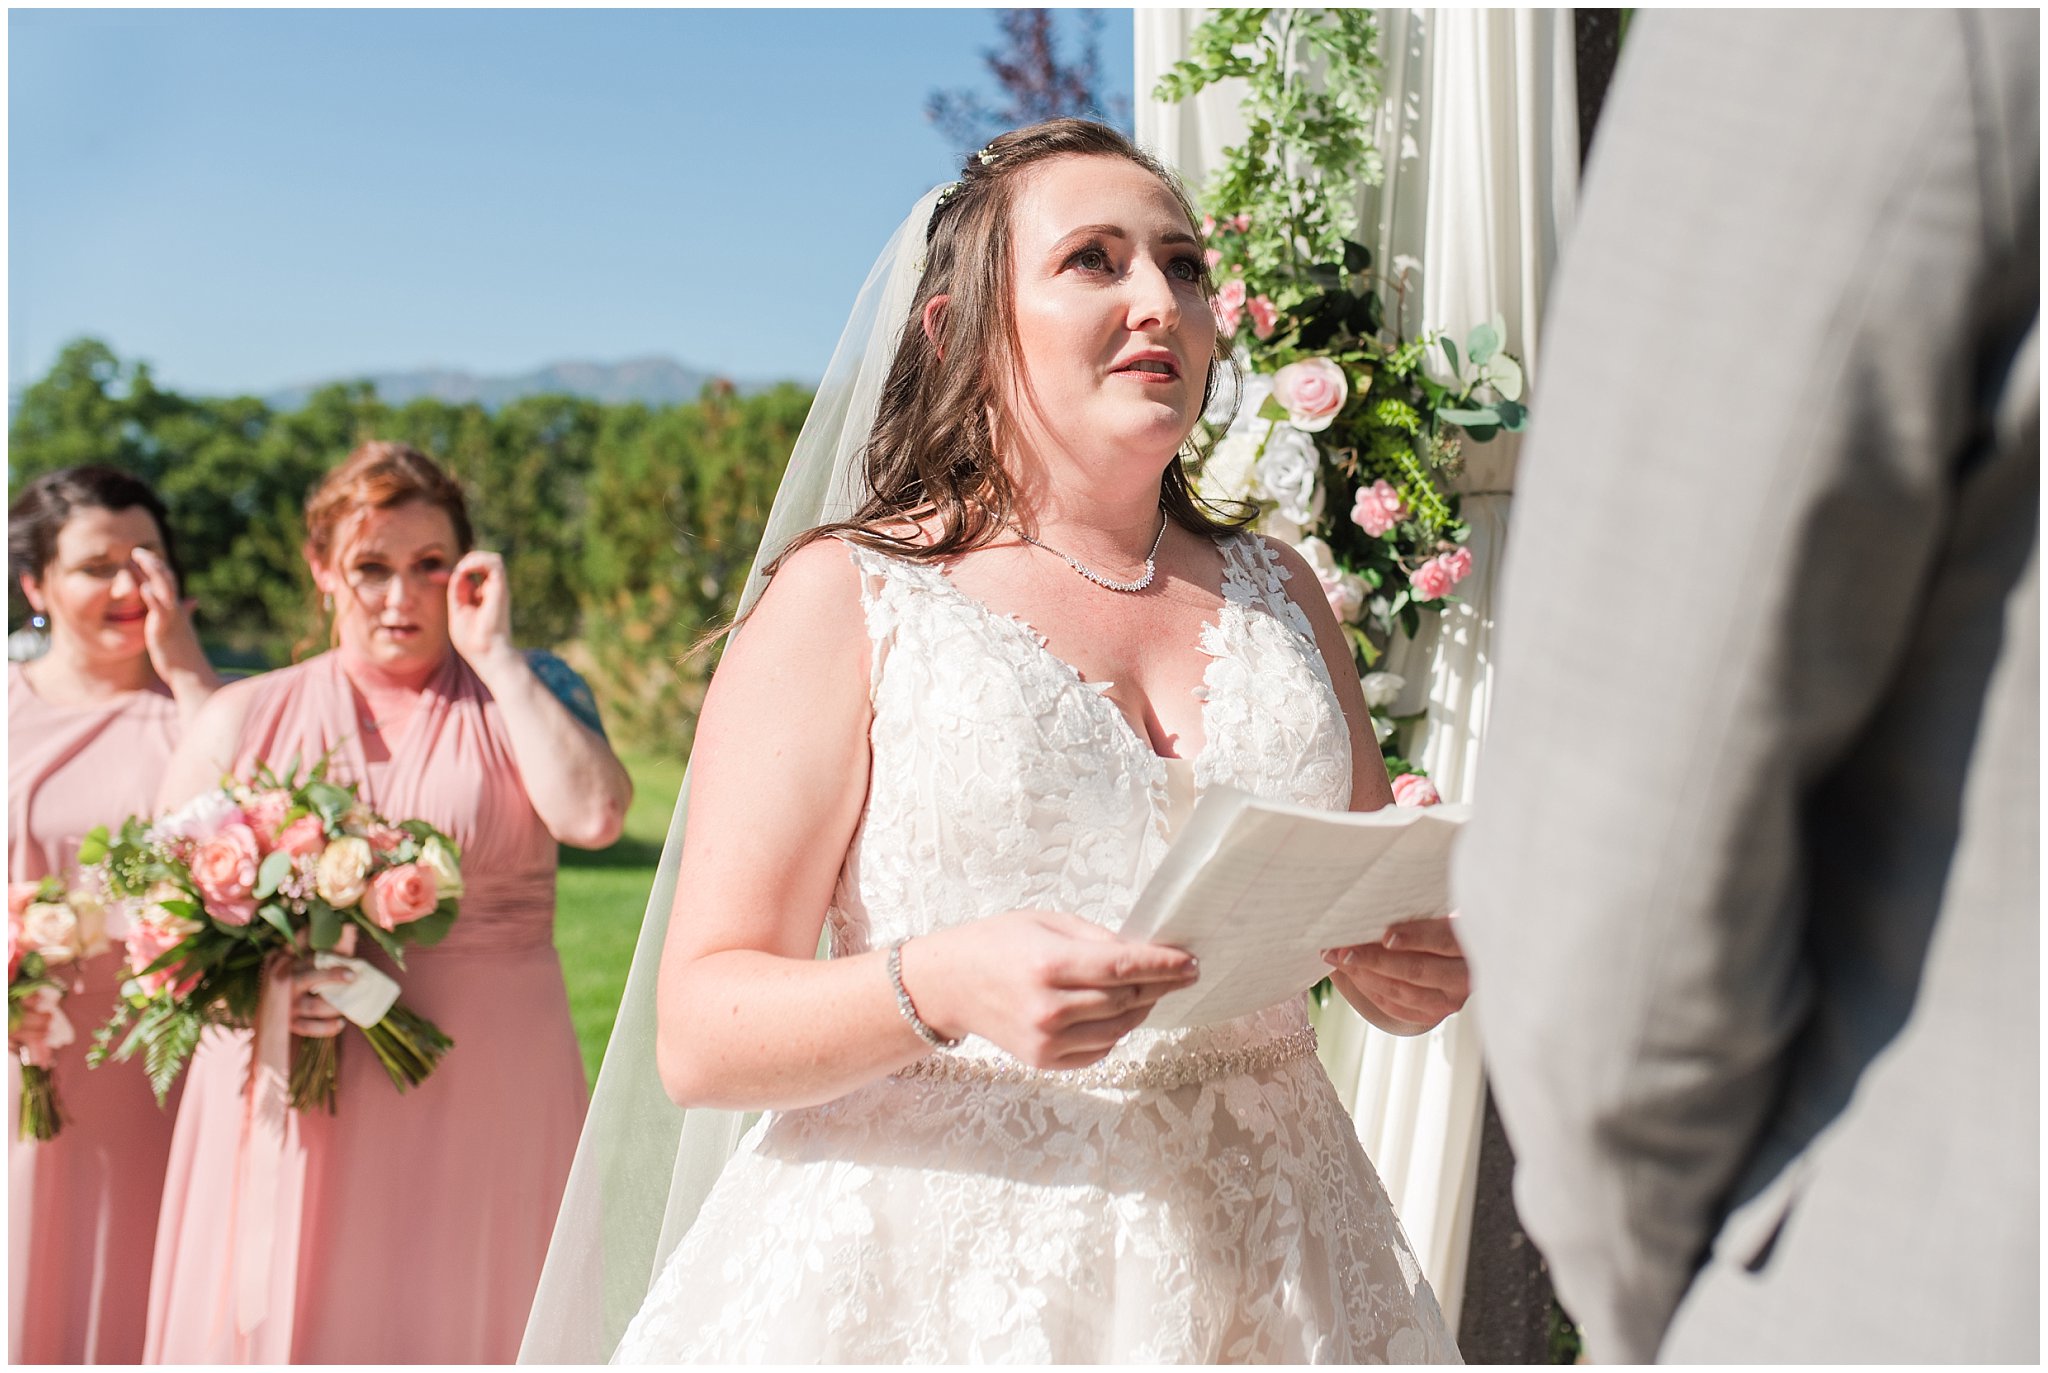 Bride reacts to vows at ceremony | Oak Hills Utah Dusty Rose and Gray Summer Wedding | Jessie and Dallin Photography